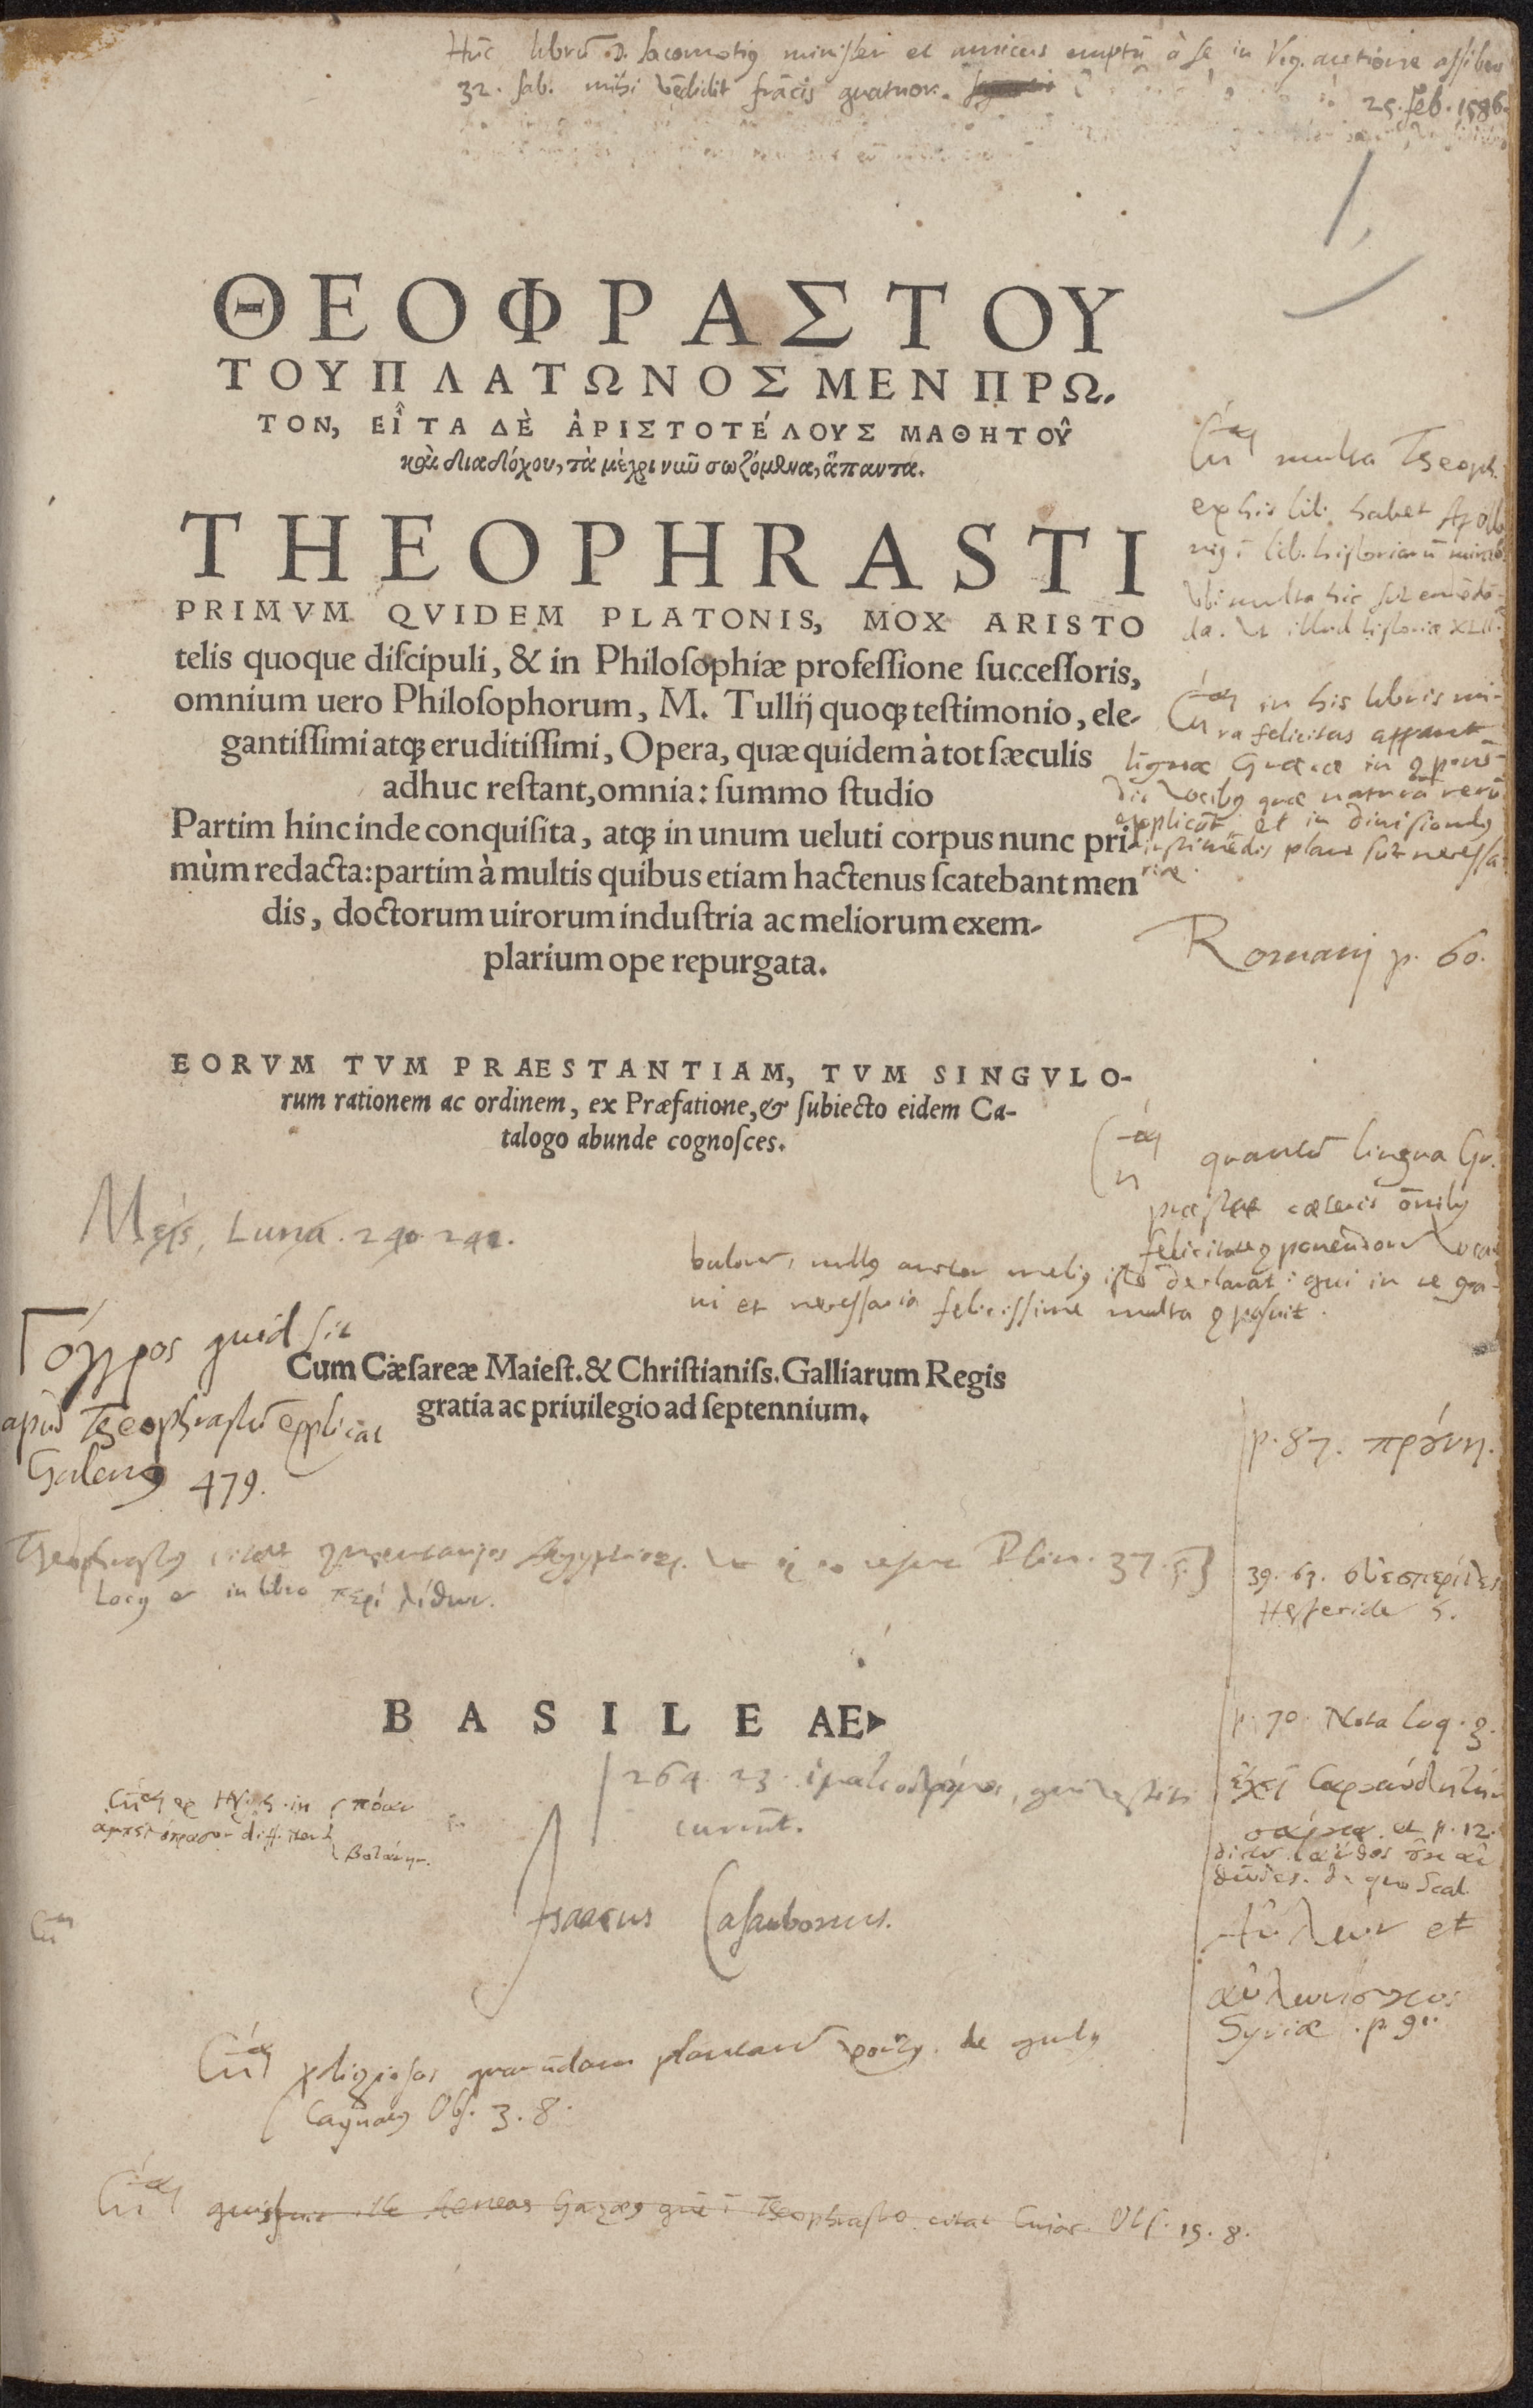 Casaubon's annotated copy of Theophrastus. By permission of the Special Collections of the University of Amsterdam. Shelf mark: OTM: Hs VII D17.